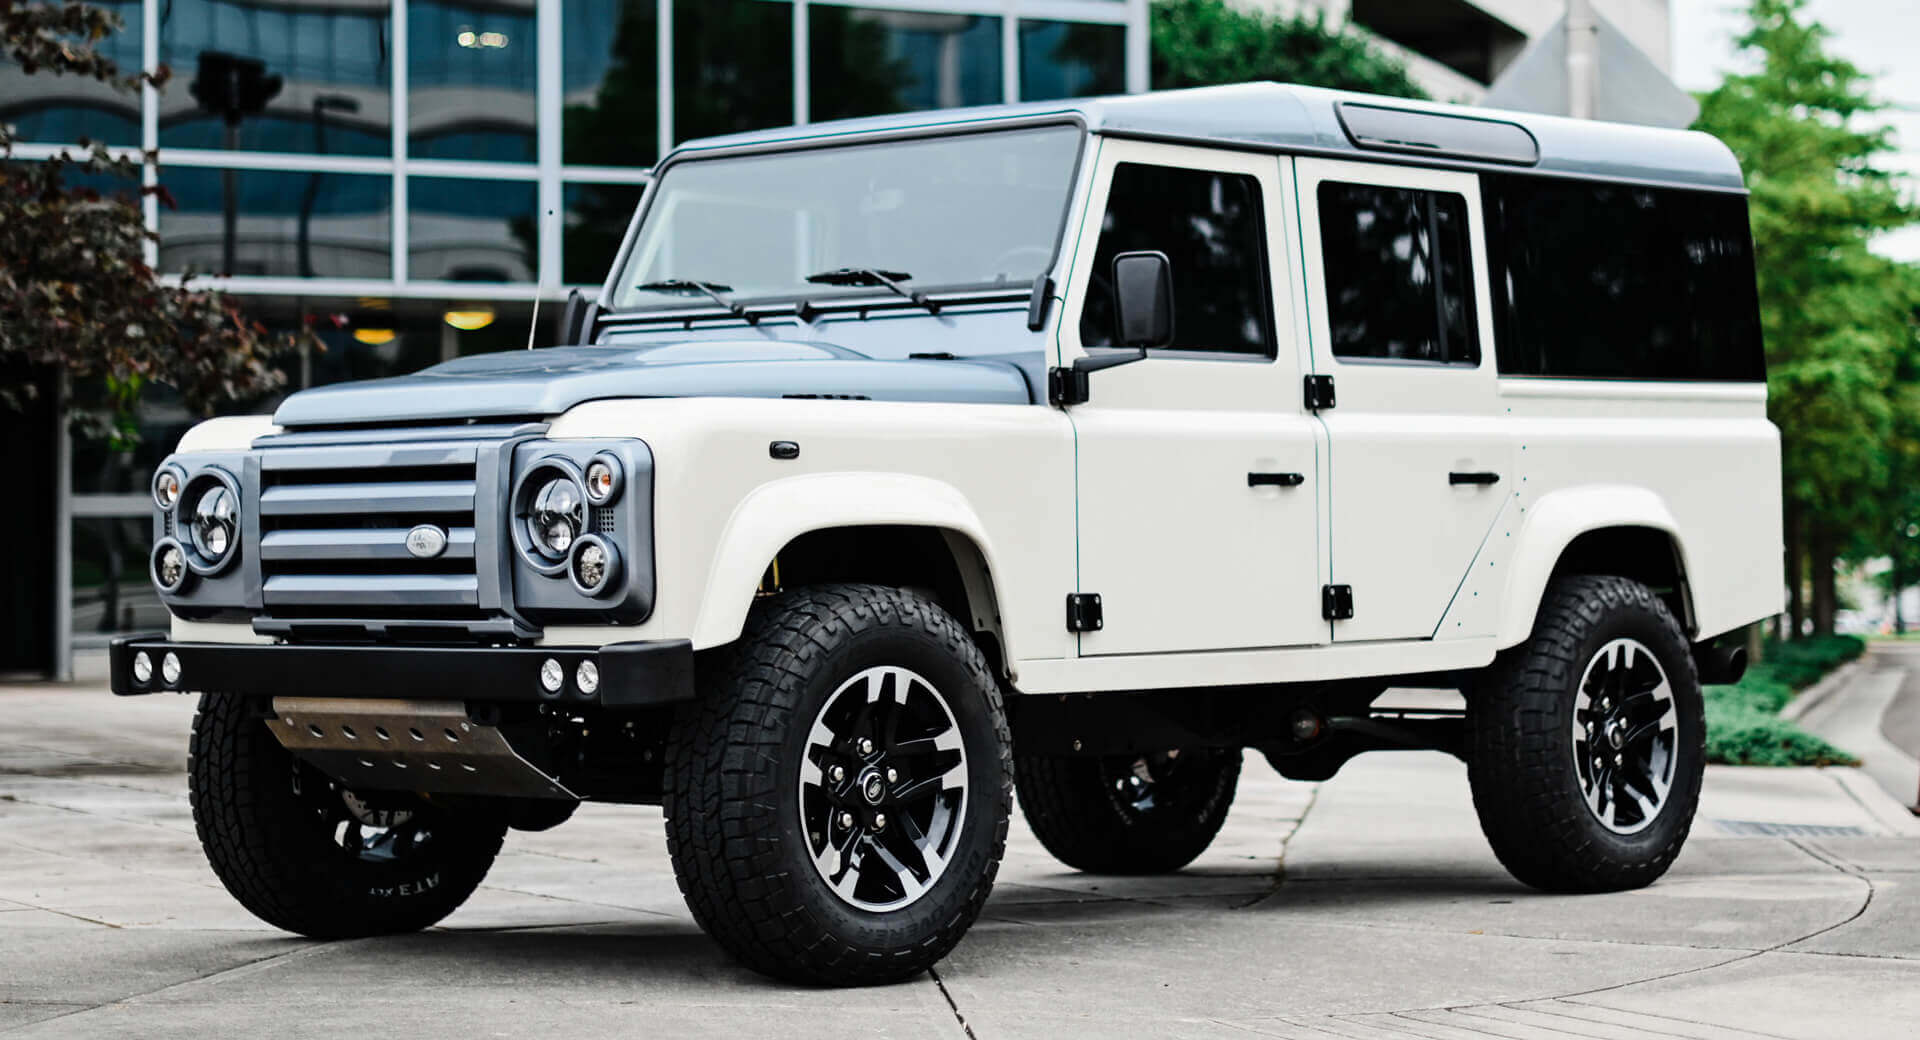 1993 Land Rover Defender 110 Restomod Wants To Roll With The Big